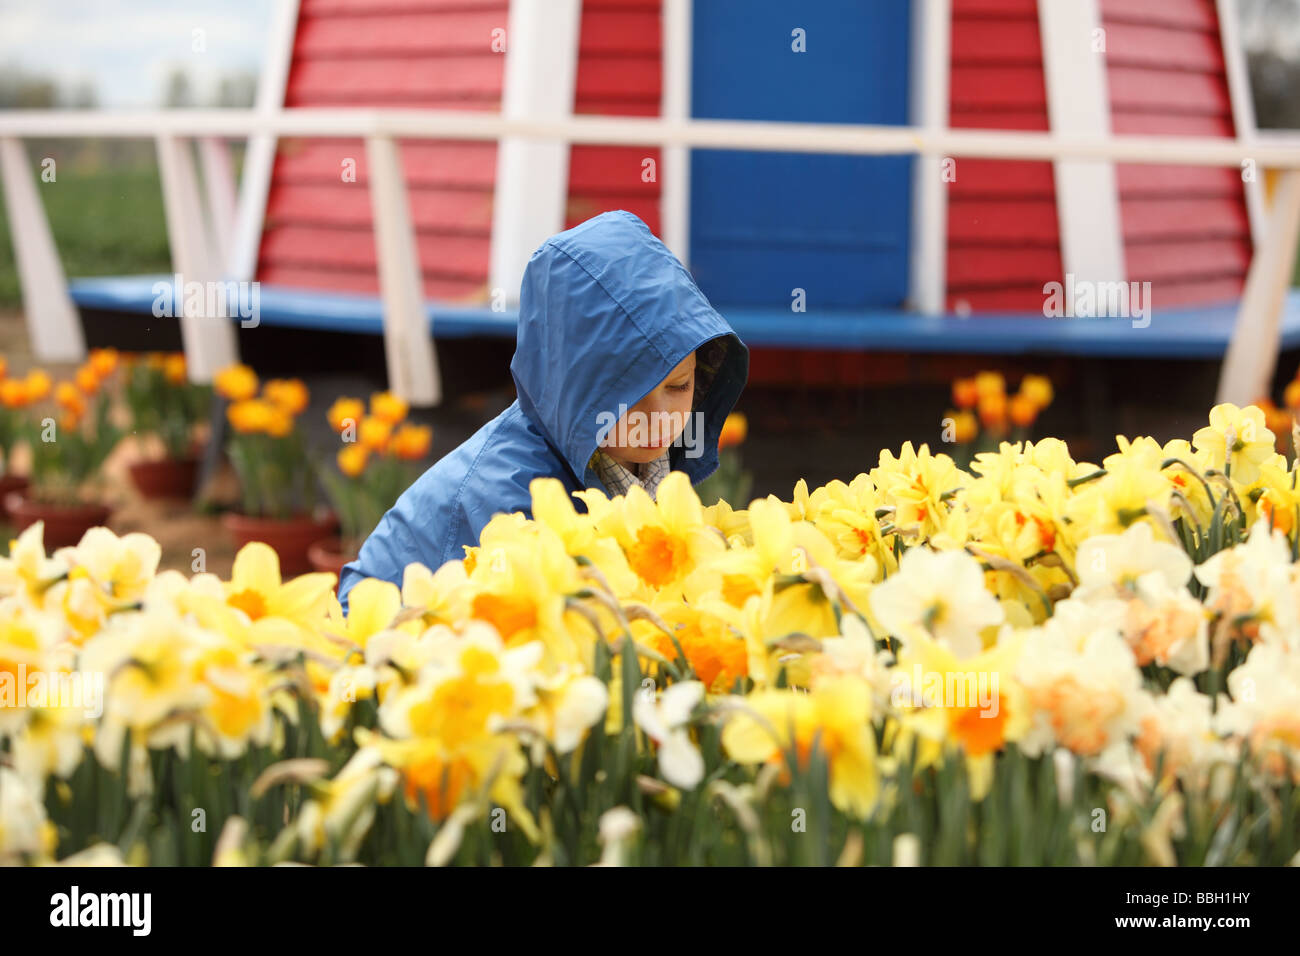 Young boy in rain jacket smelling flowers Stock Photo